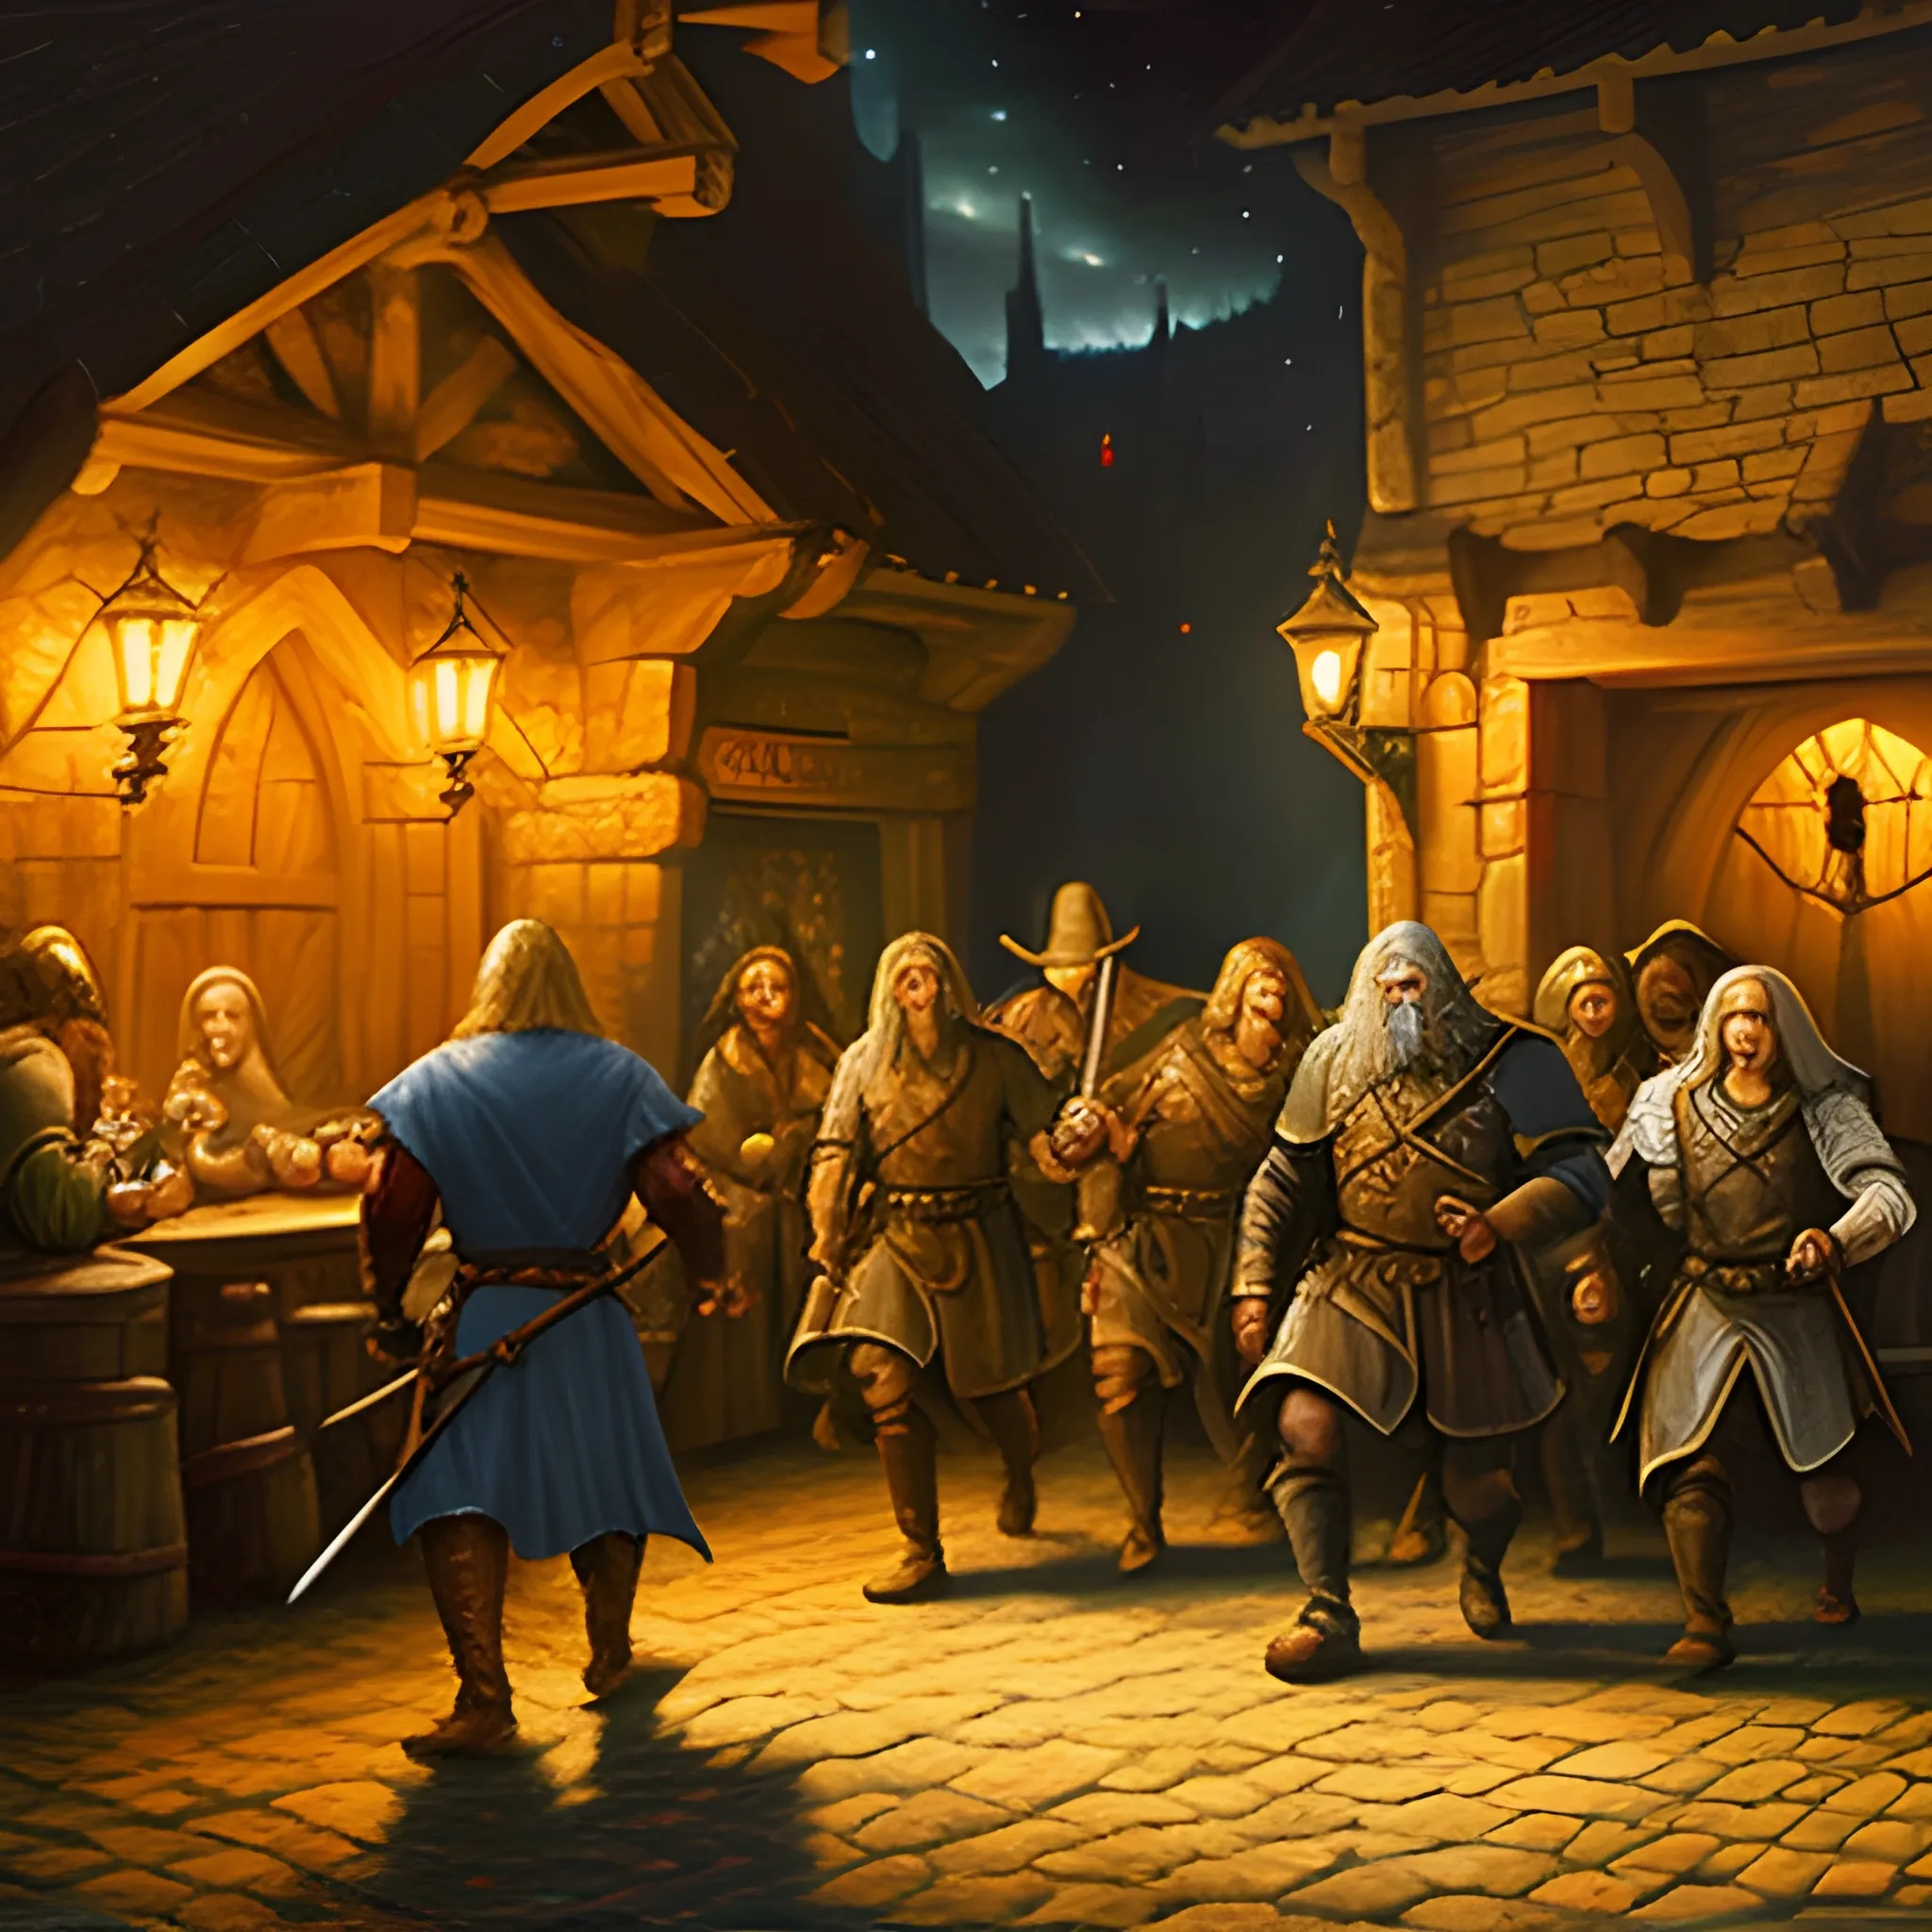 brigands entering the tavern at night, middle earth, Oil Painting